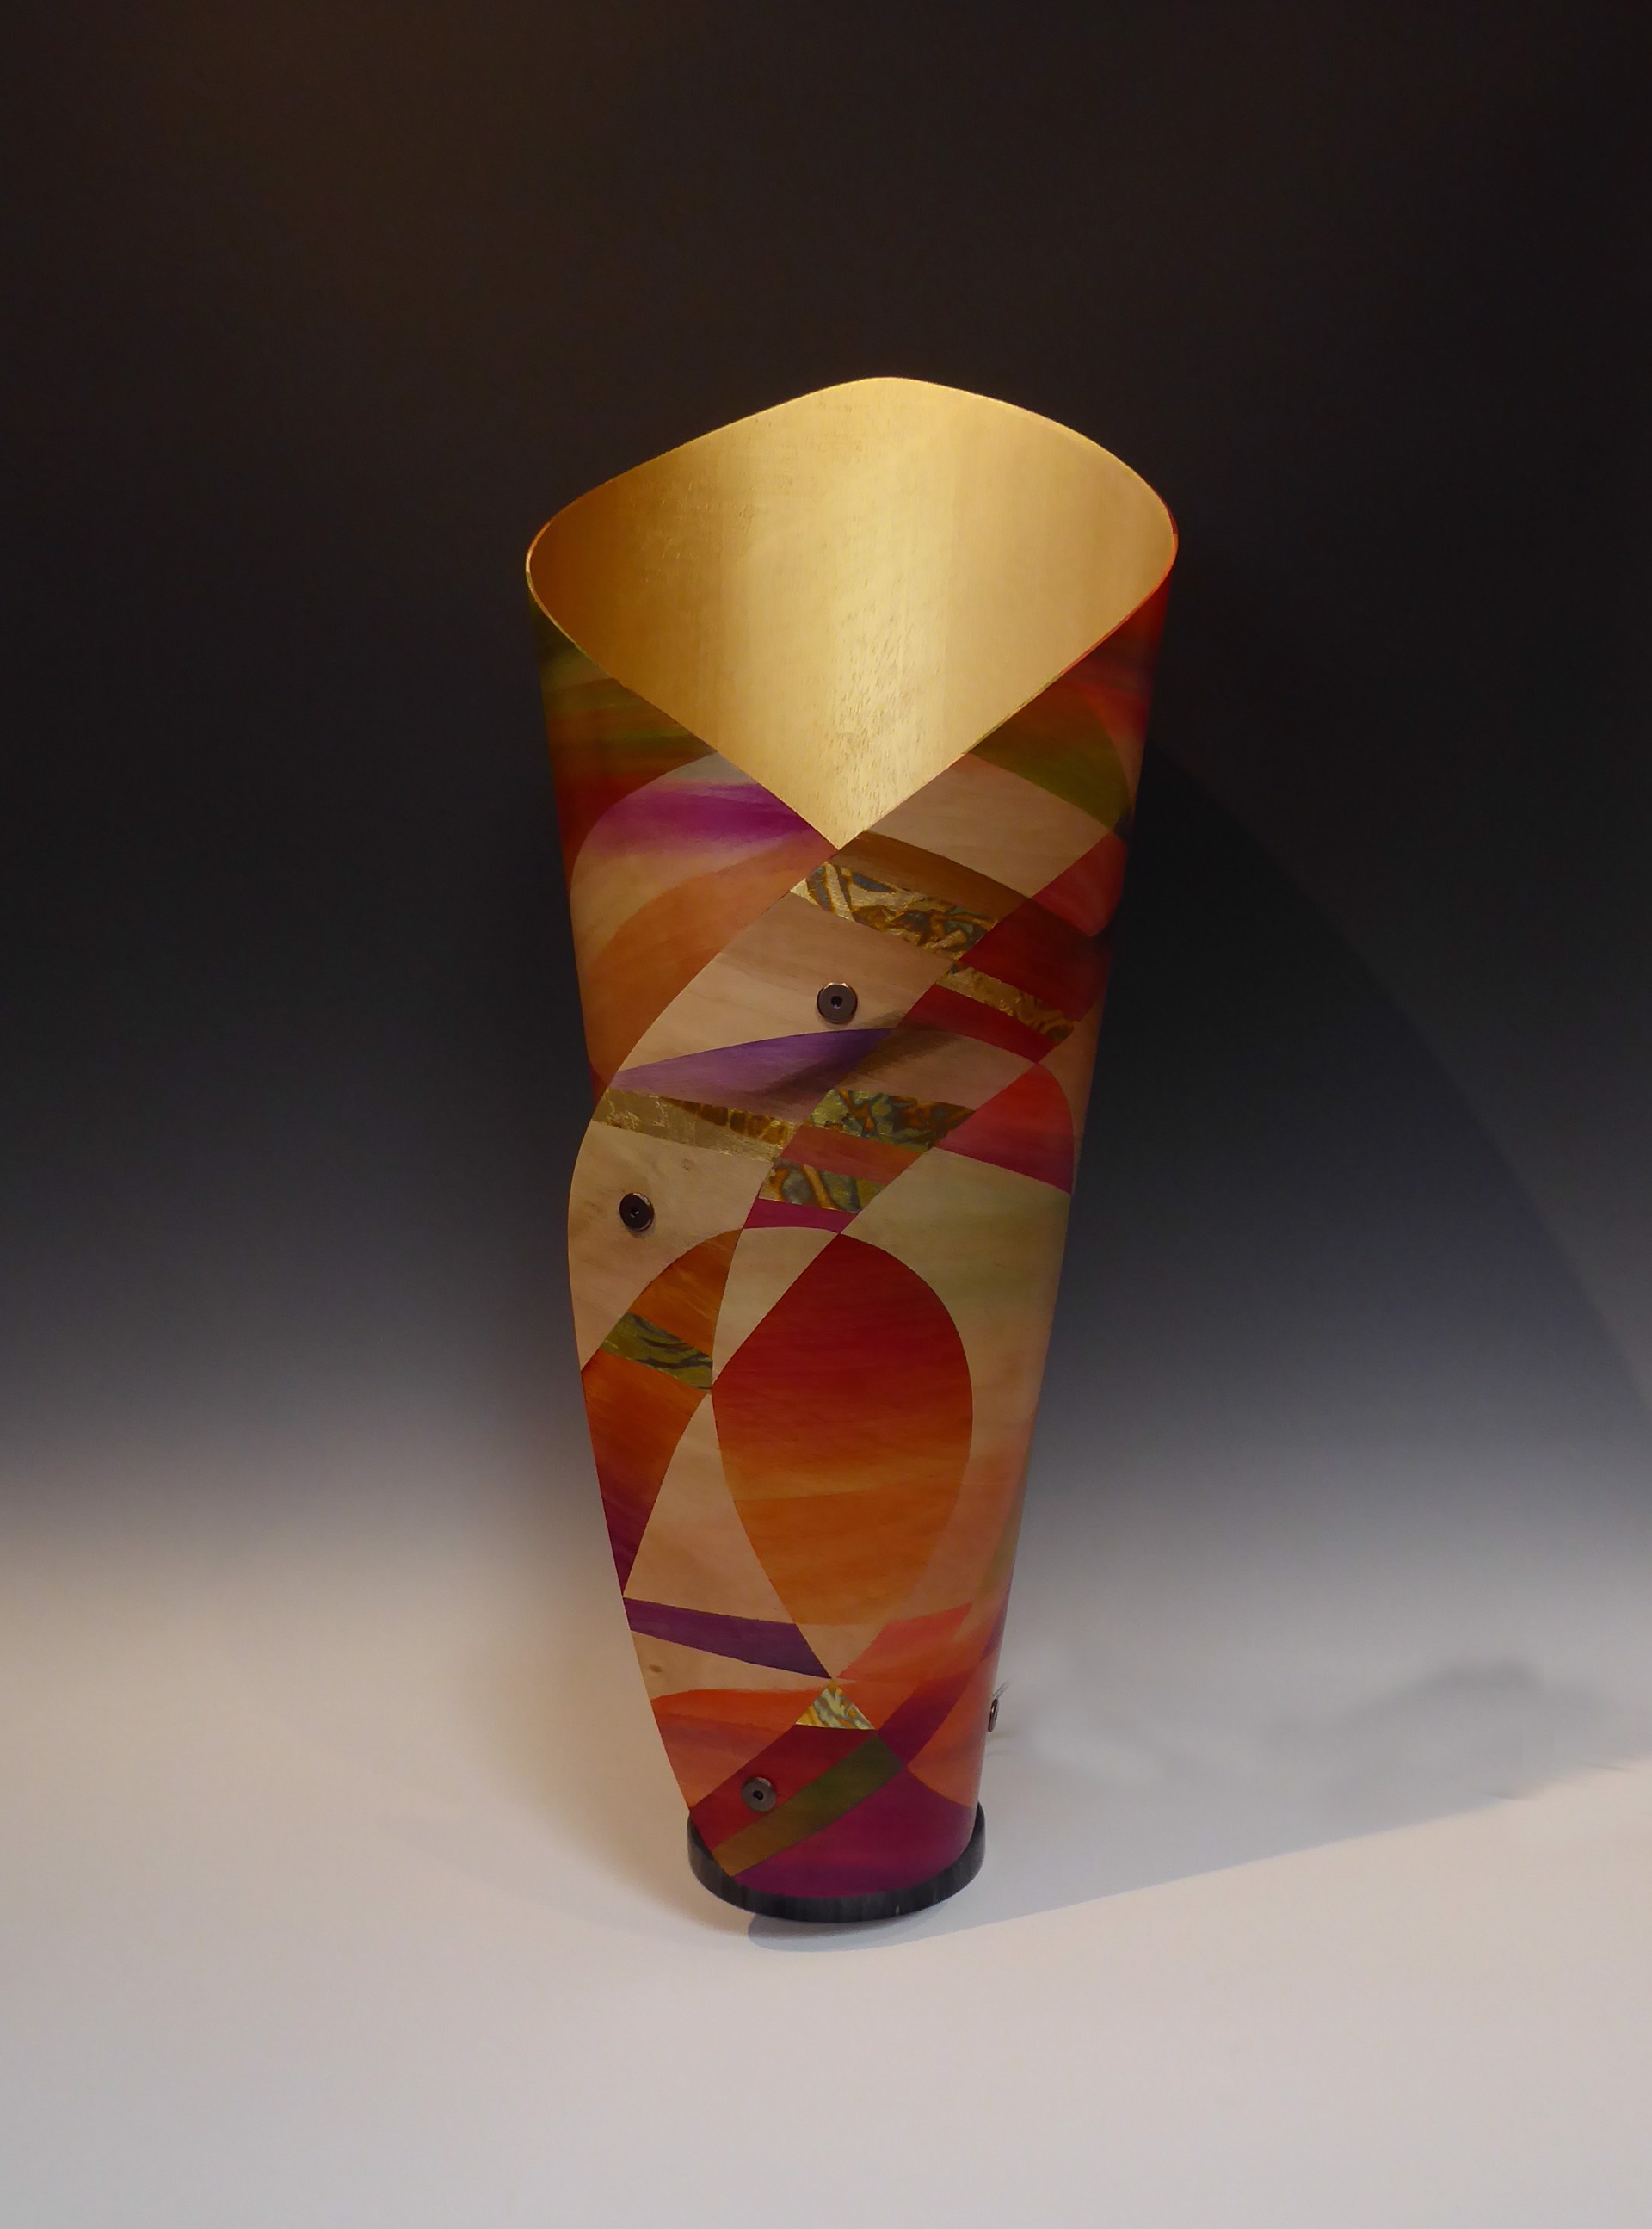 Canyon Sunset Sculptural Lamp by Cynthia Duff